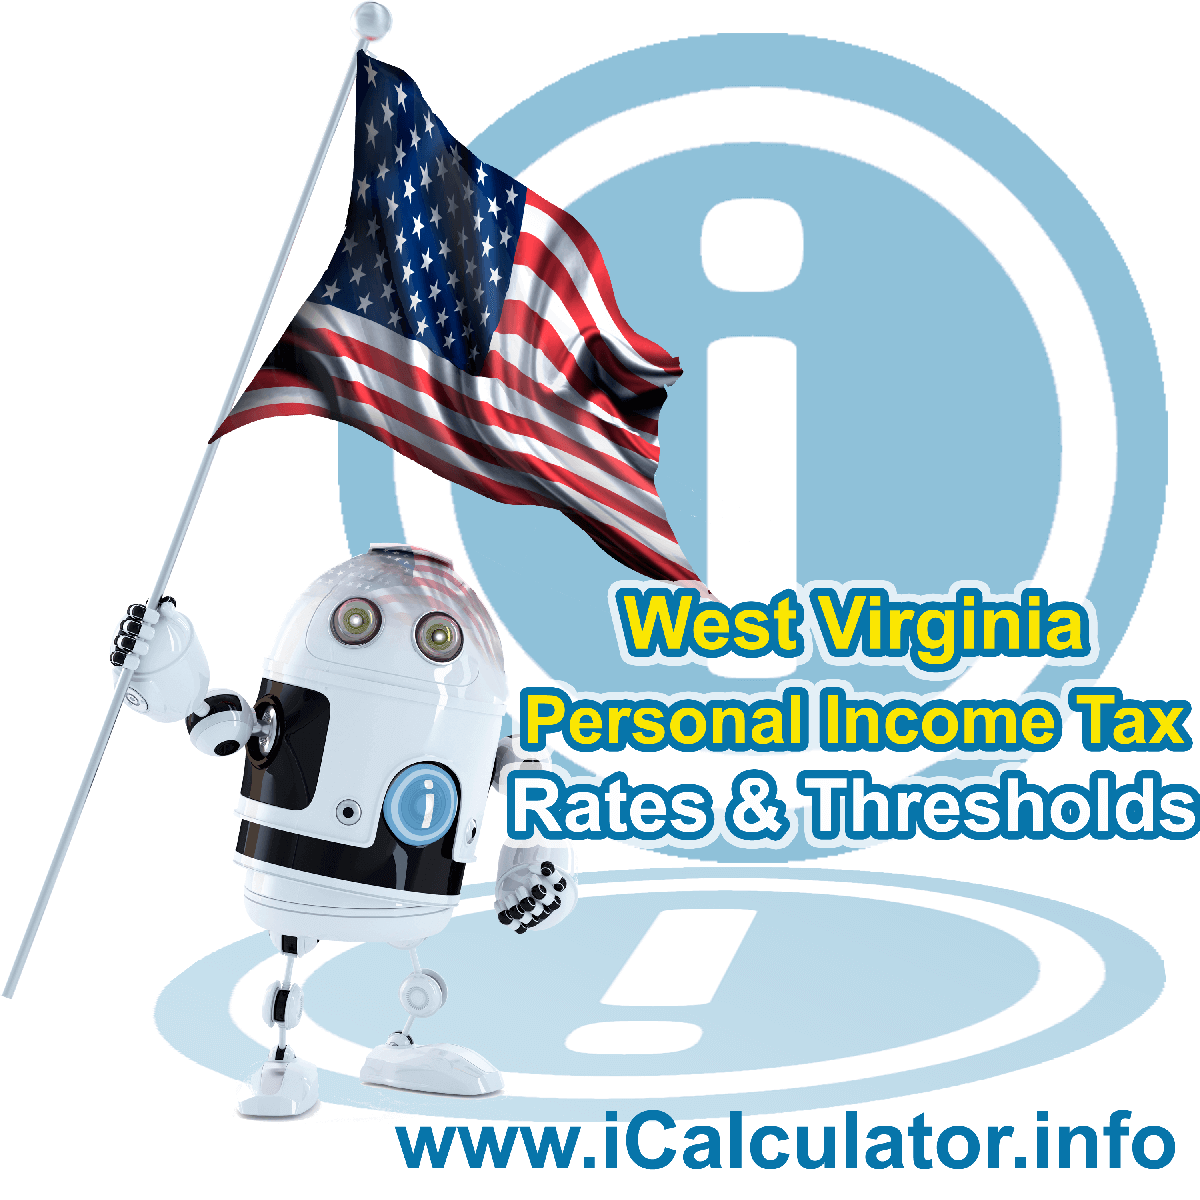 West Virginia State Tax Tables 2016. This image displays details of the West Virginia State Tax Tables for the 2016 tax return year which is provided in support of the 2016 US Tax Calculator